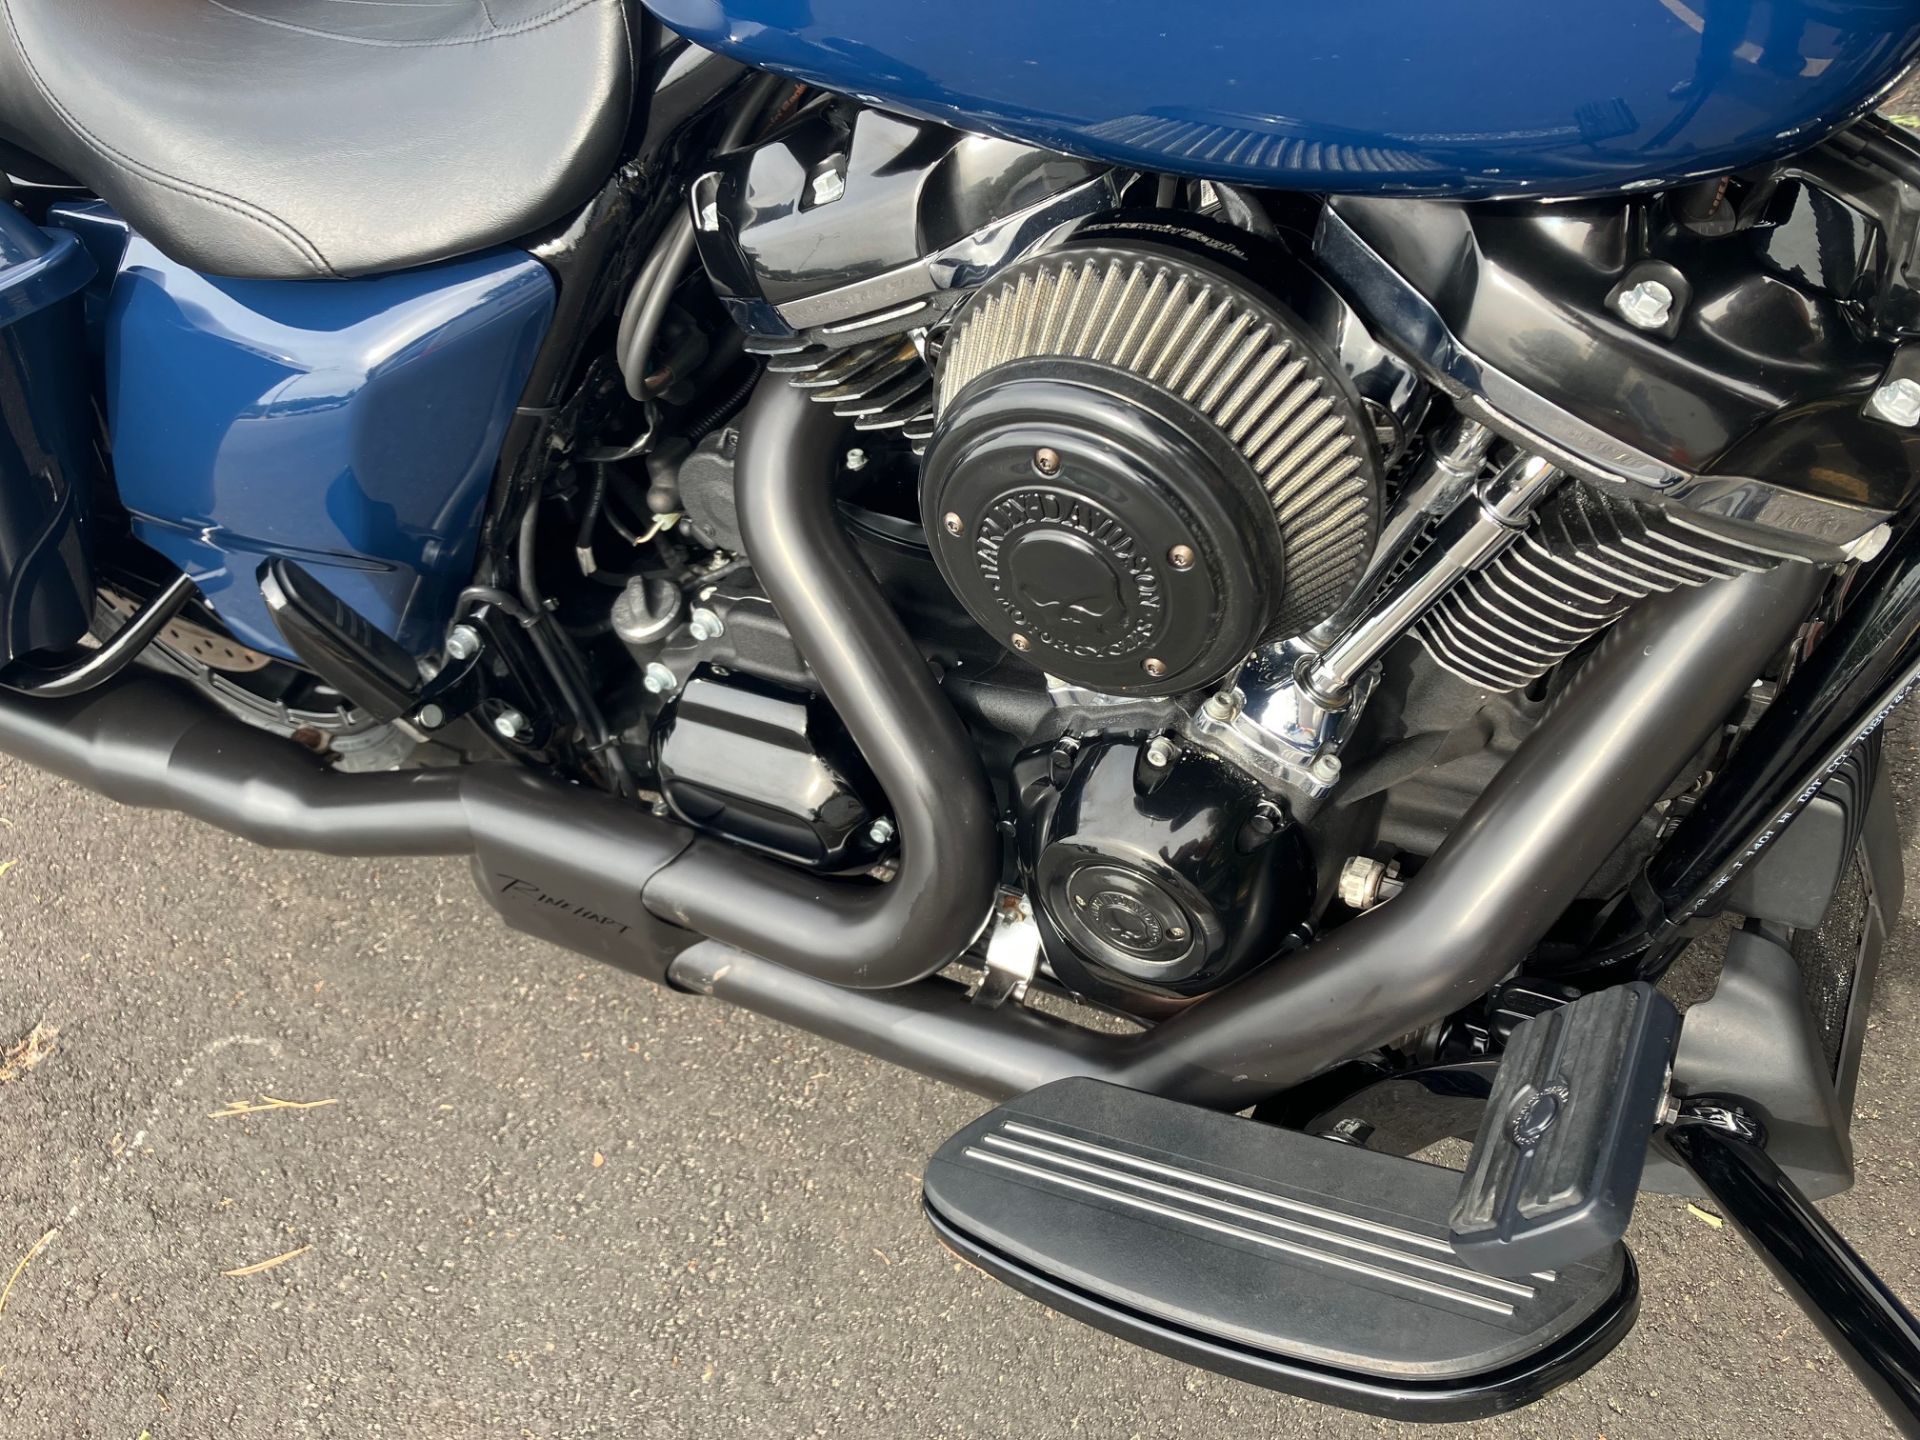 2019 Harley-Davidson STREET GLIDE SPECIAL in West Long Branch, New Jersey - Photo 9